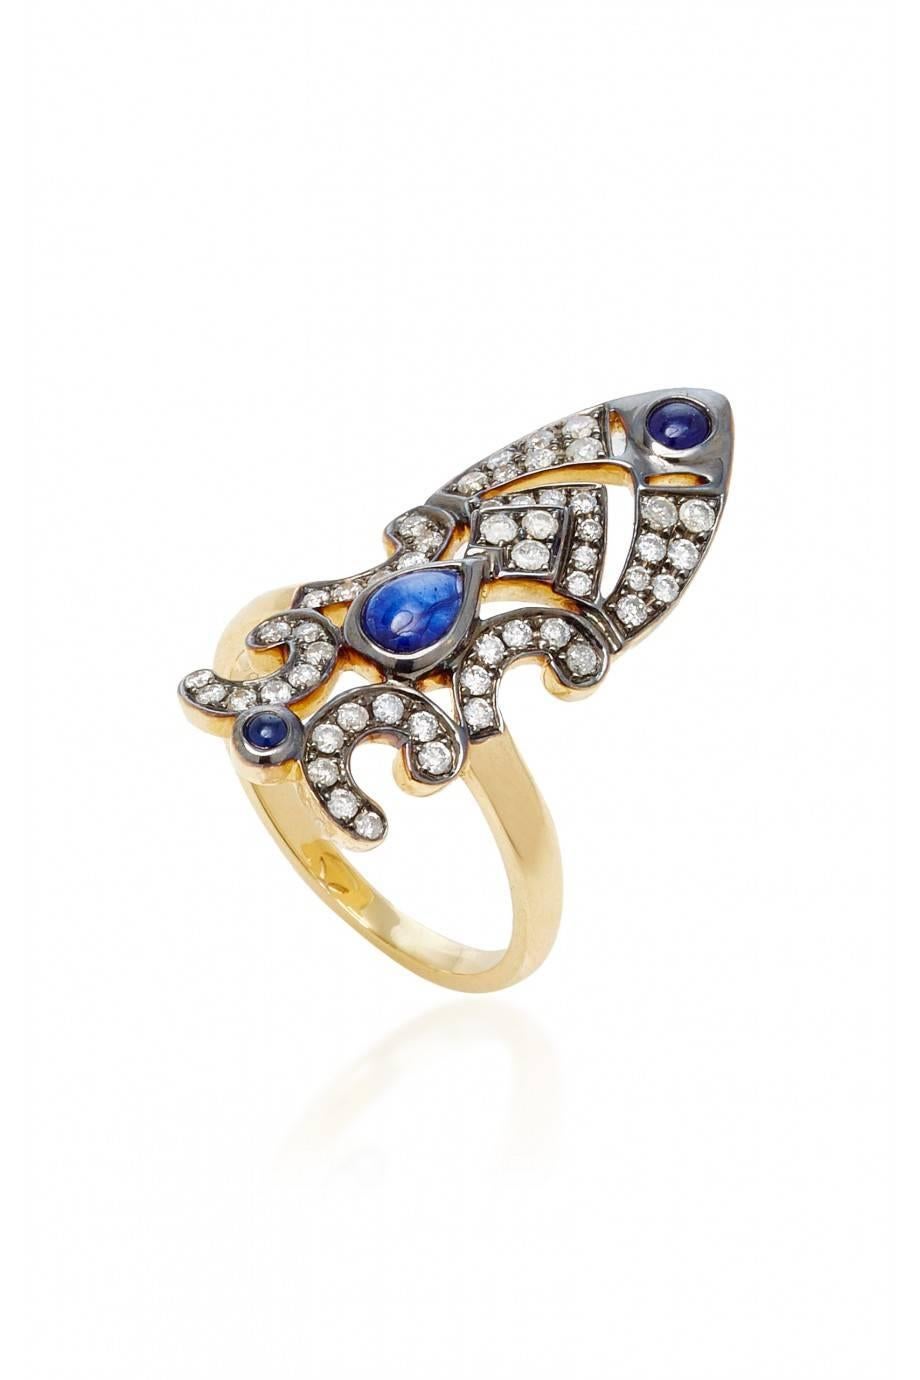 Ring in 18K Yellow gold 5gr approx.
Grey diamonds 0,42 carats approx.
Blue Sapphire 0,85 carats approx.
Size 44 (EU)